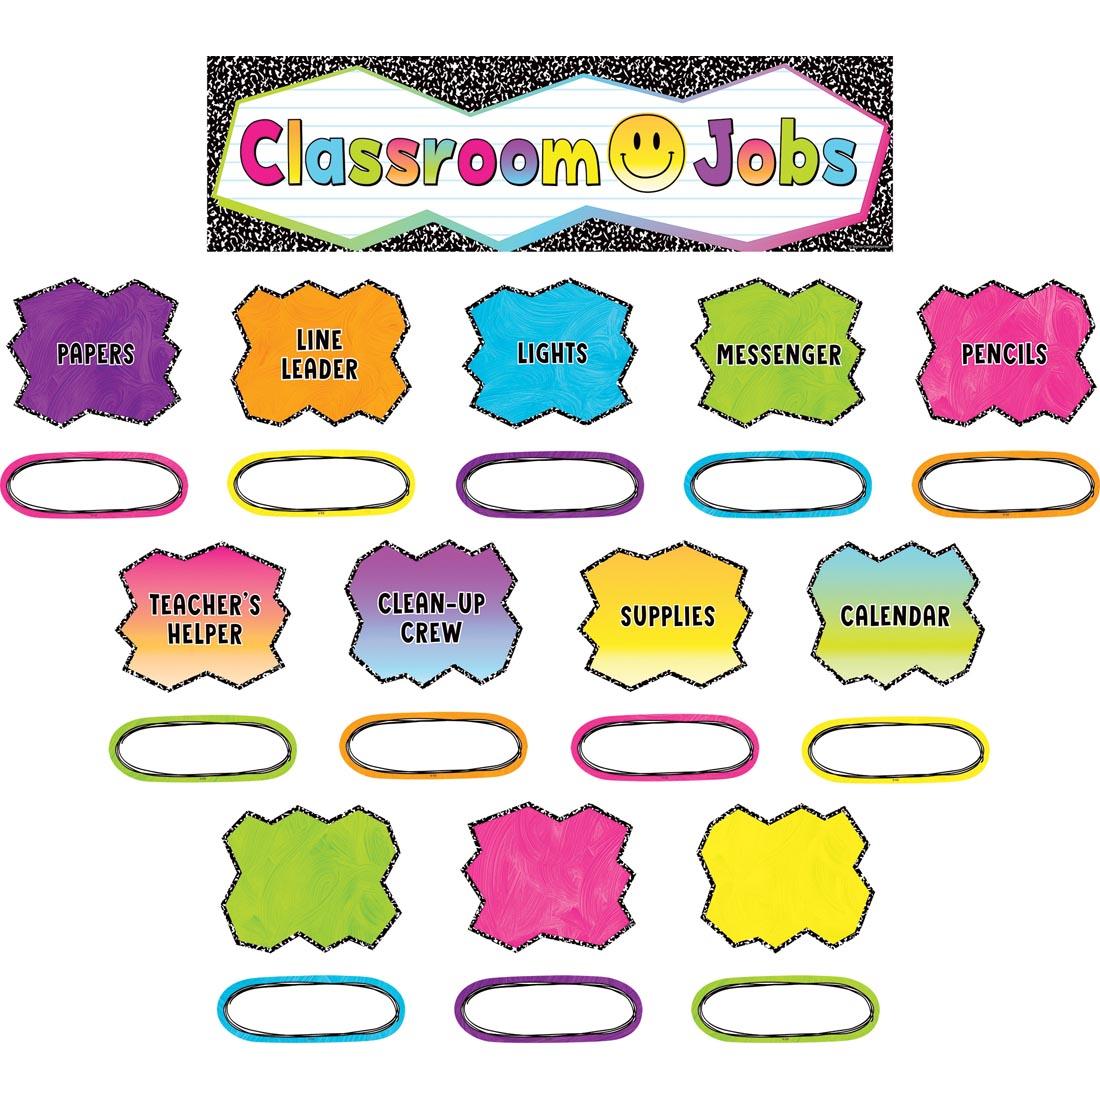 Classroom Jobs Mini Bulletin Board Set from the Brights 4Ever collection by Teacher Created Resources